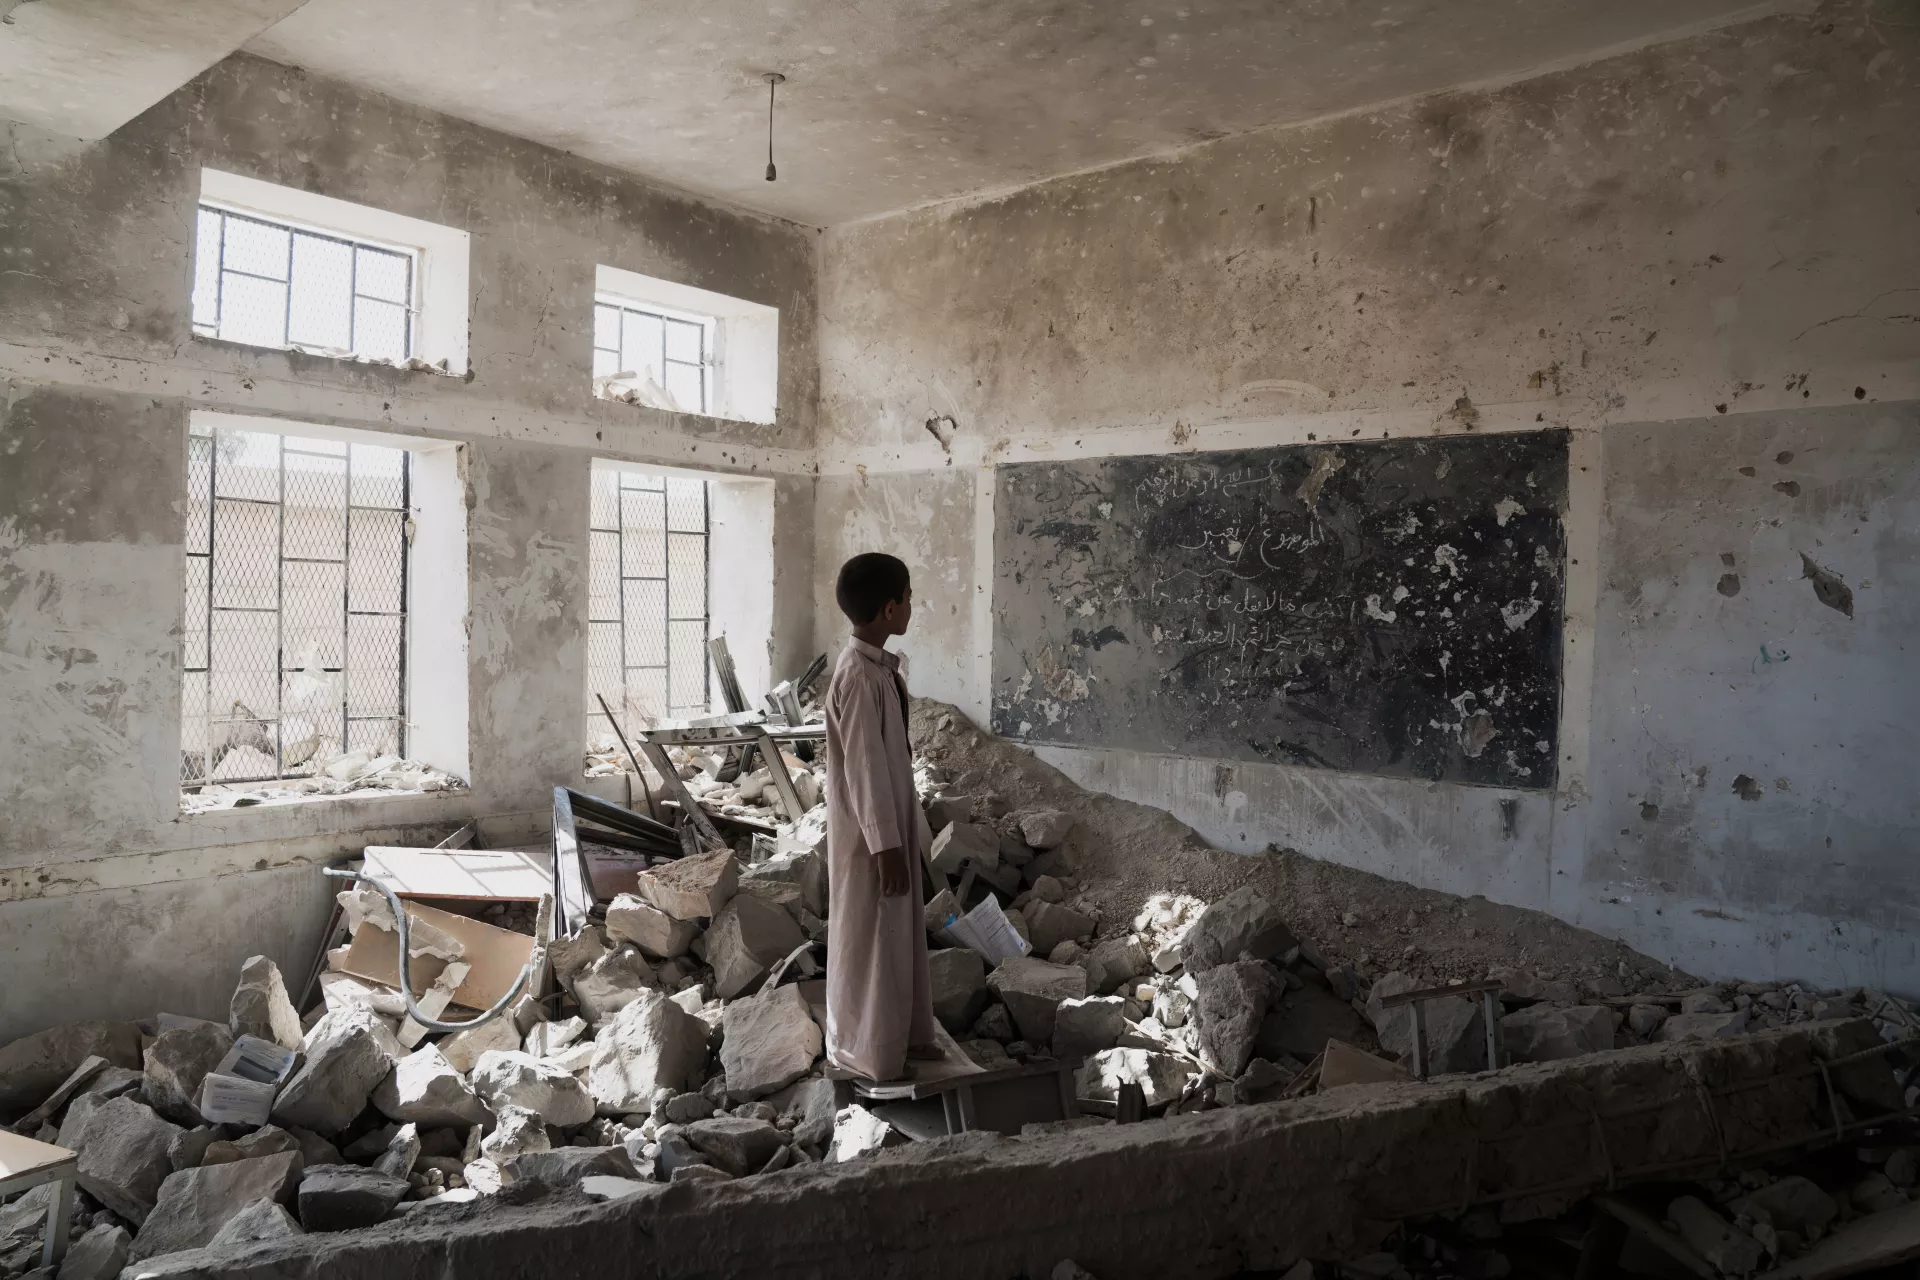 A young child stands in a classroom of rubble in Saada, Yemen, staring at what used to be a chalkboard.